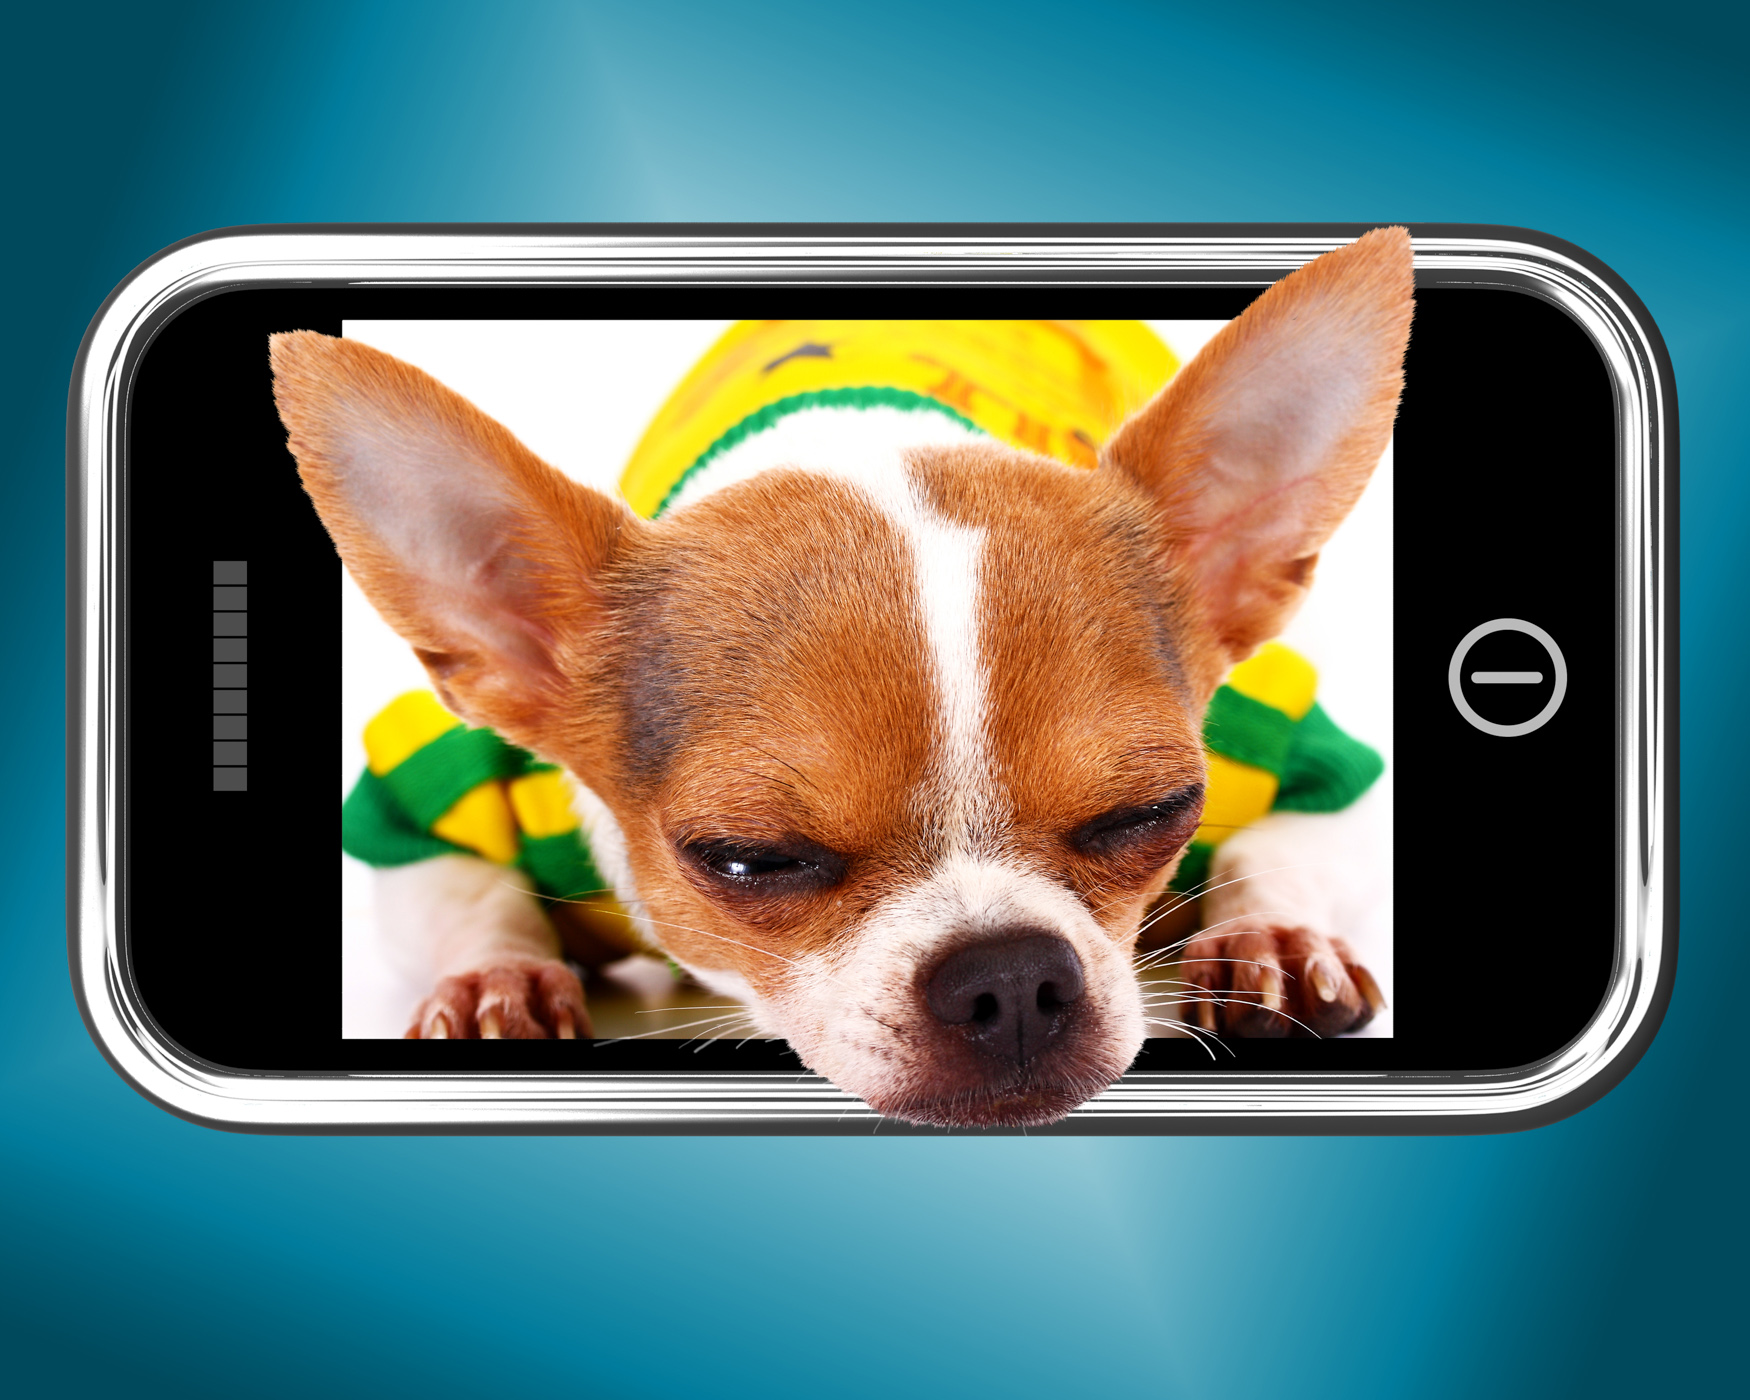 Small chihuahua dog photo on mobile phone